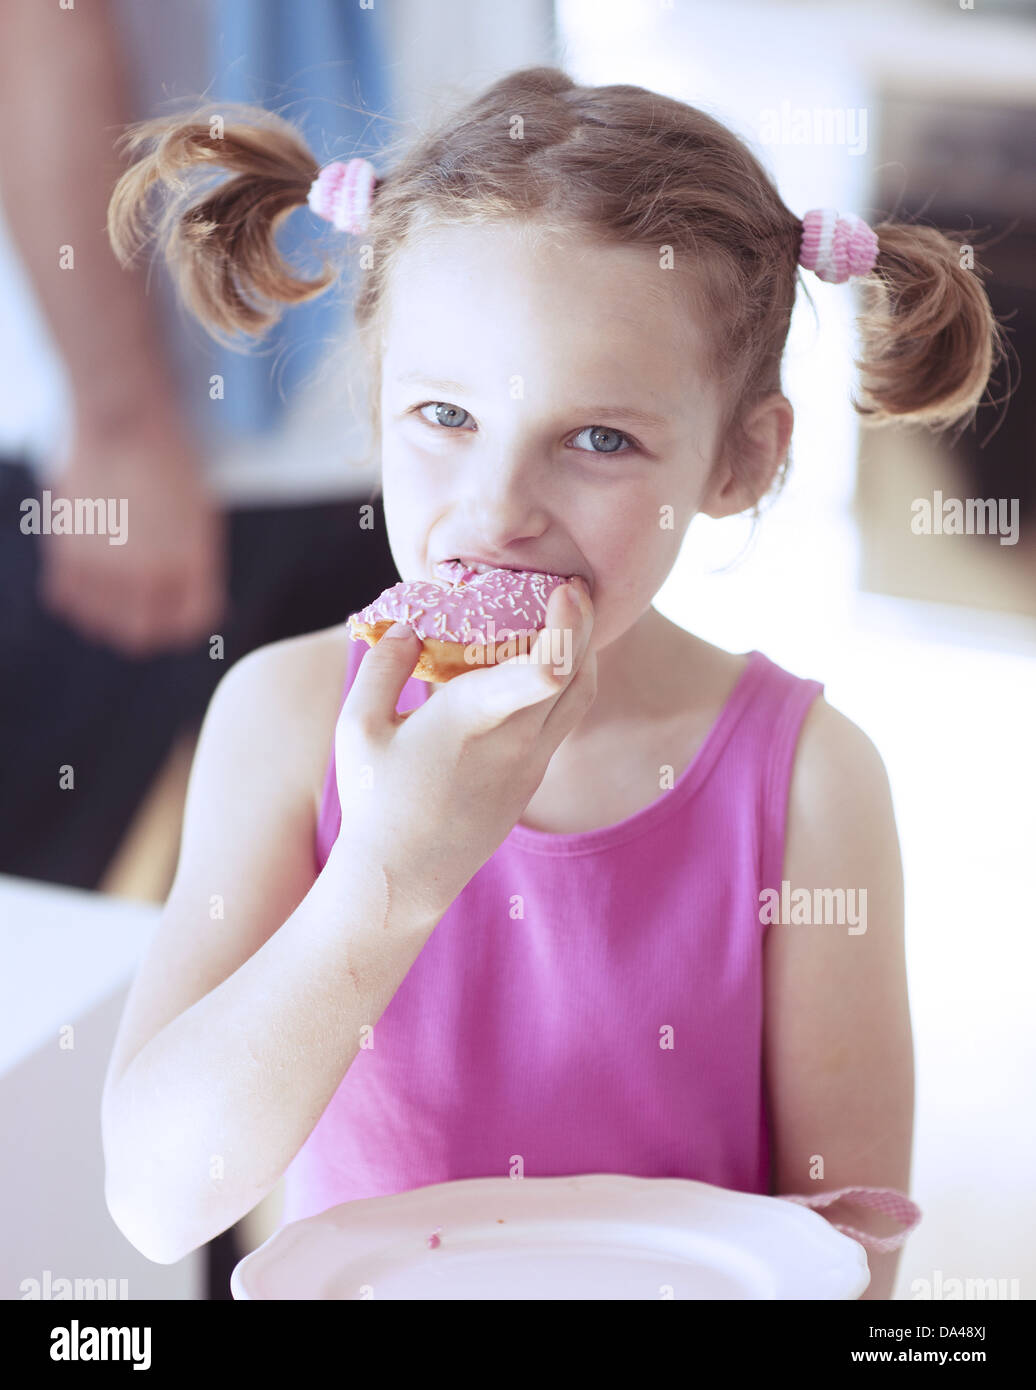 Young Girl eating cake in kitchen Banque D'Images